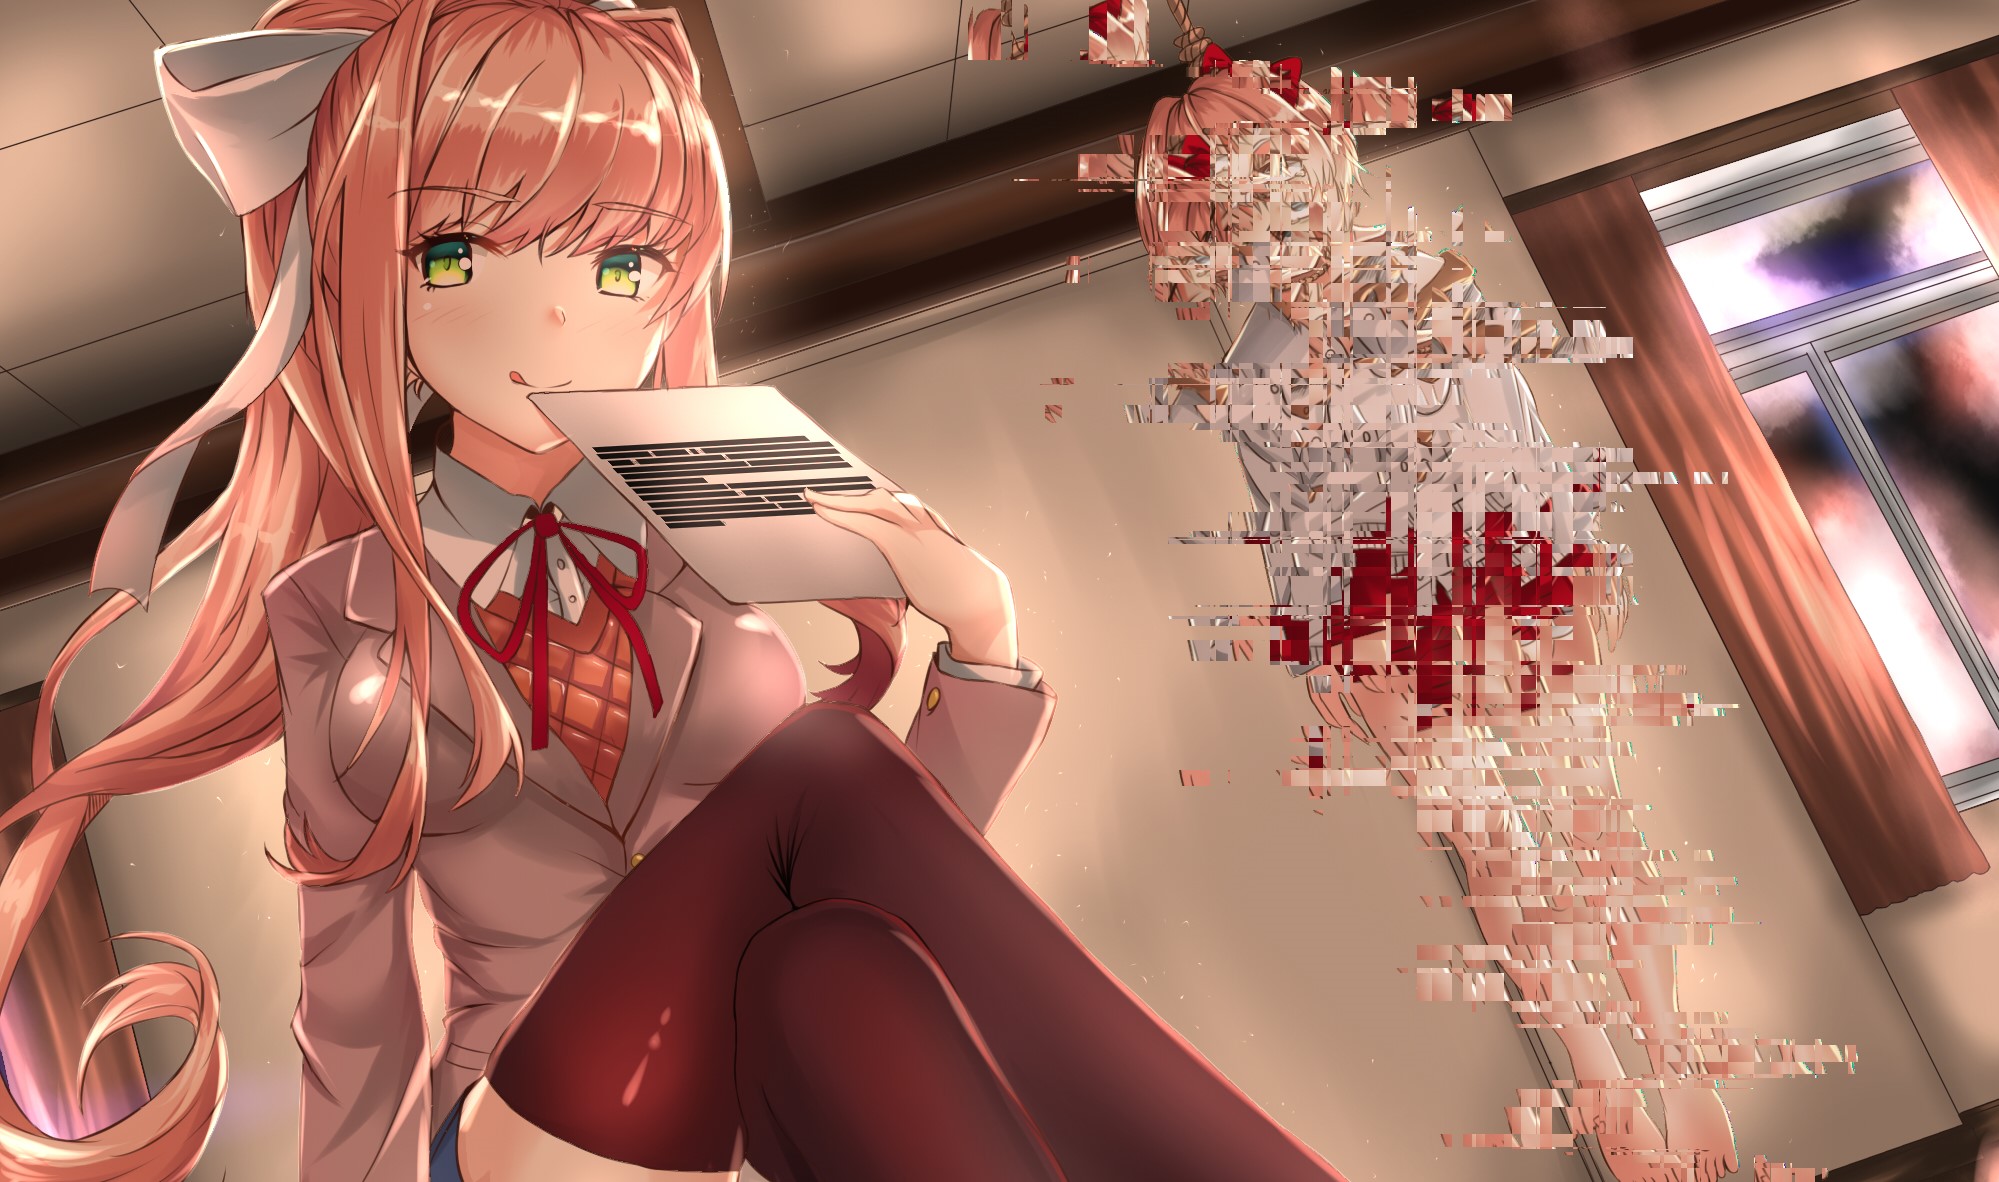 Monika Talks About The Character Files